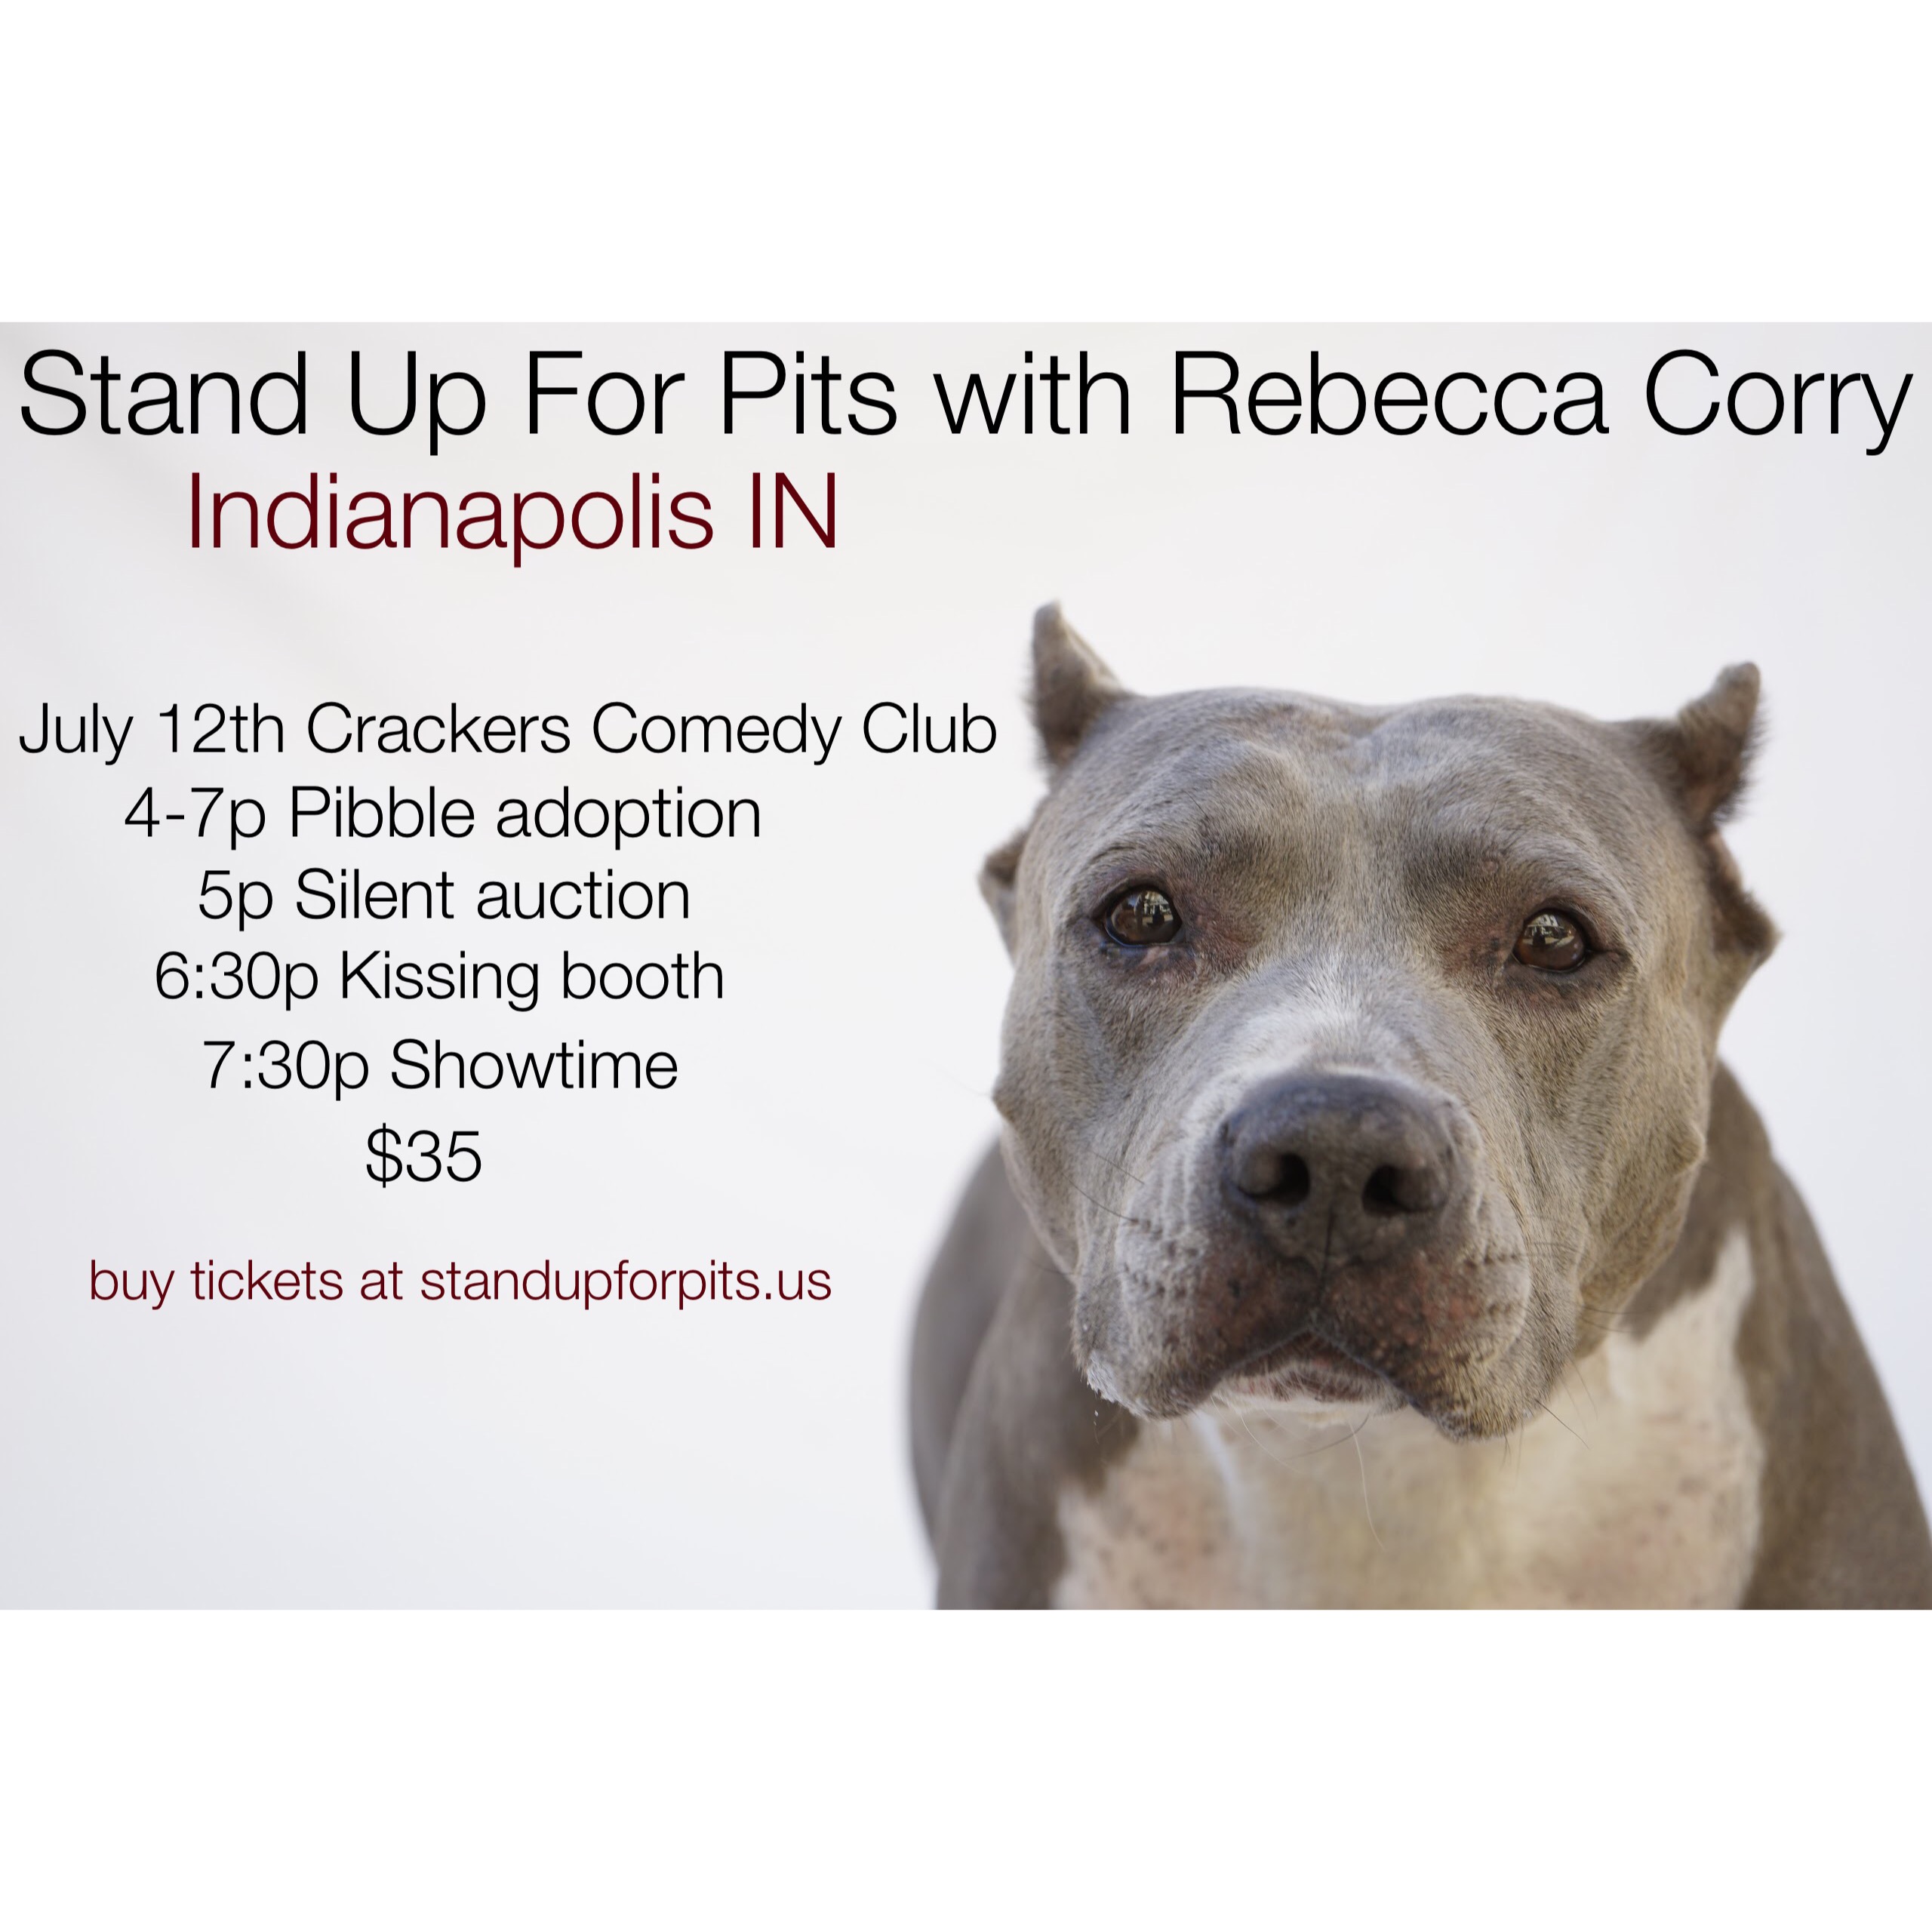 tickets on sale now for indianapolis stand up for pits!!!